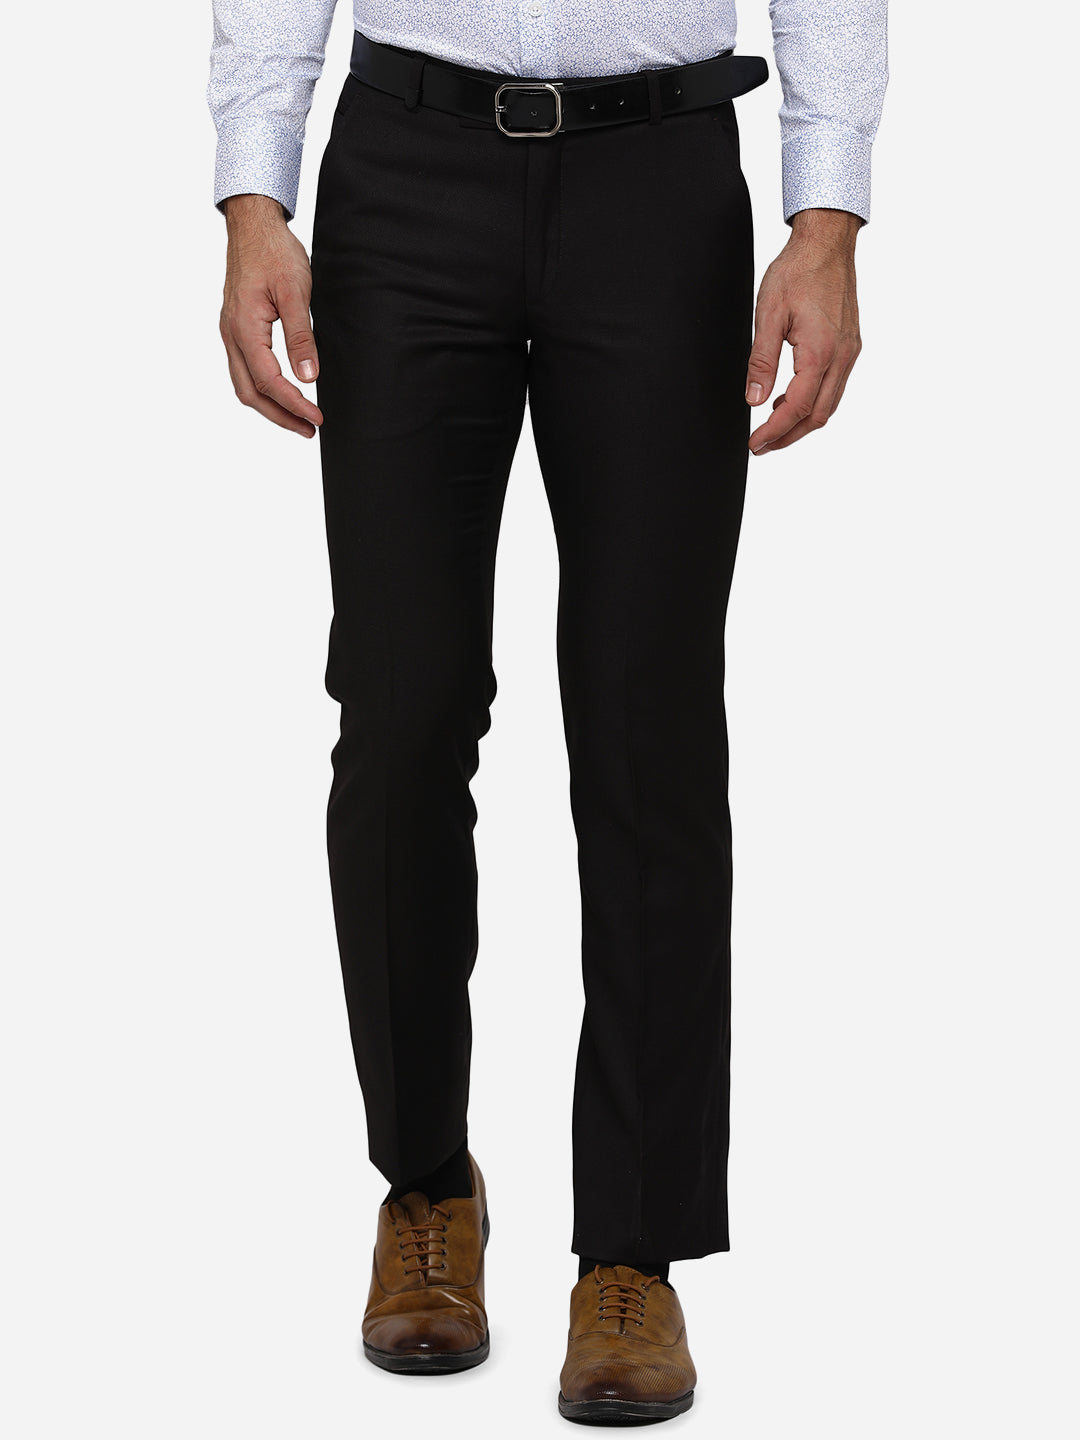 Buy Men's Solid Full Length Formal Trousers Online | Centrepoint Qatar